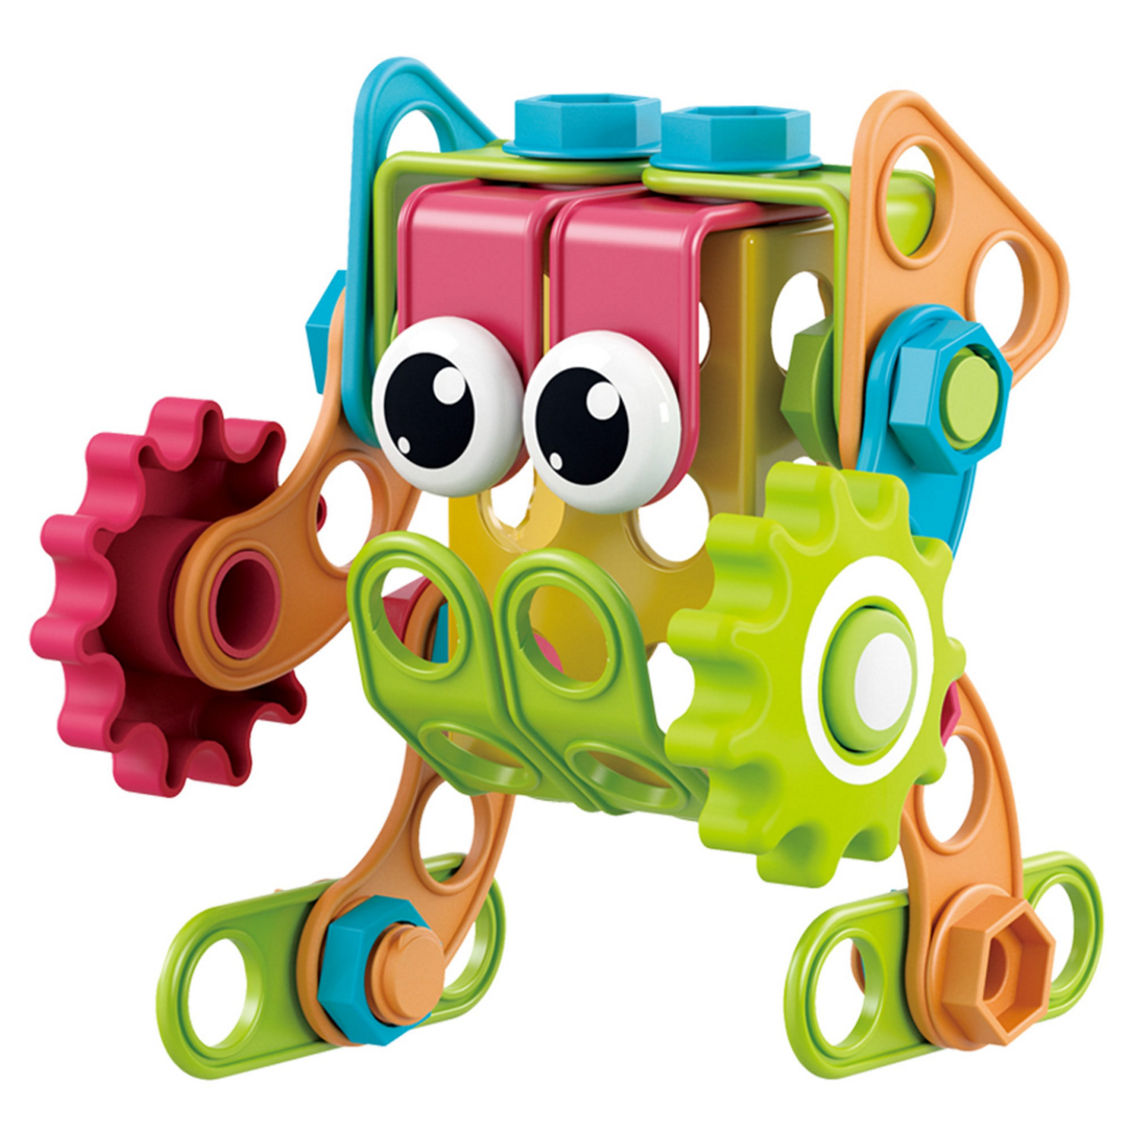 PicassoTiles® Engineering Construction Building Set, 250 Pieces - Image 3 of 5